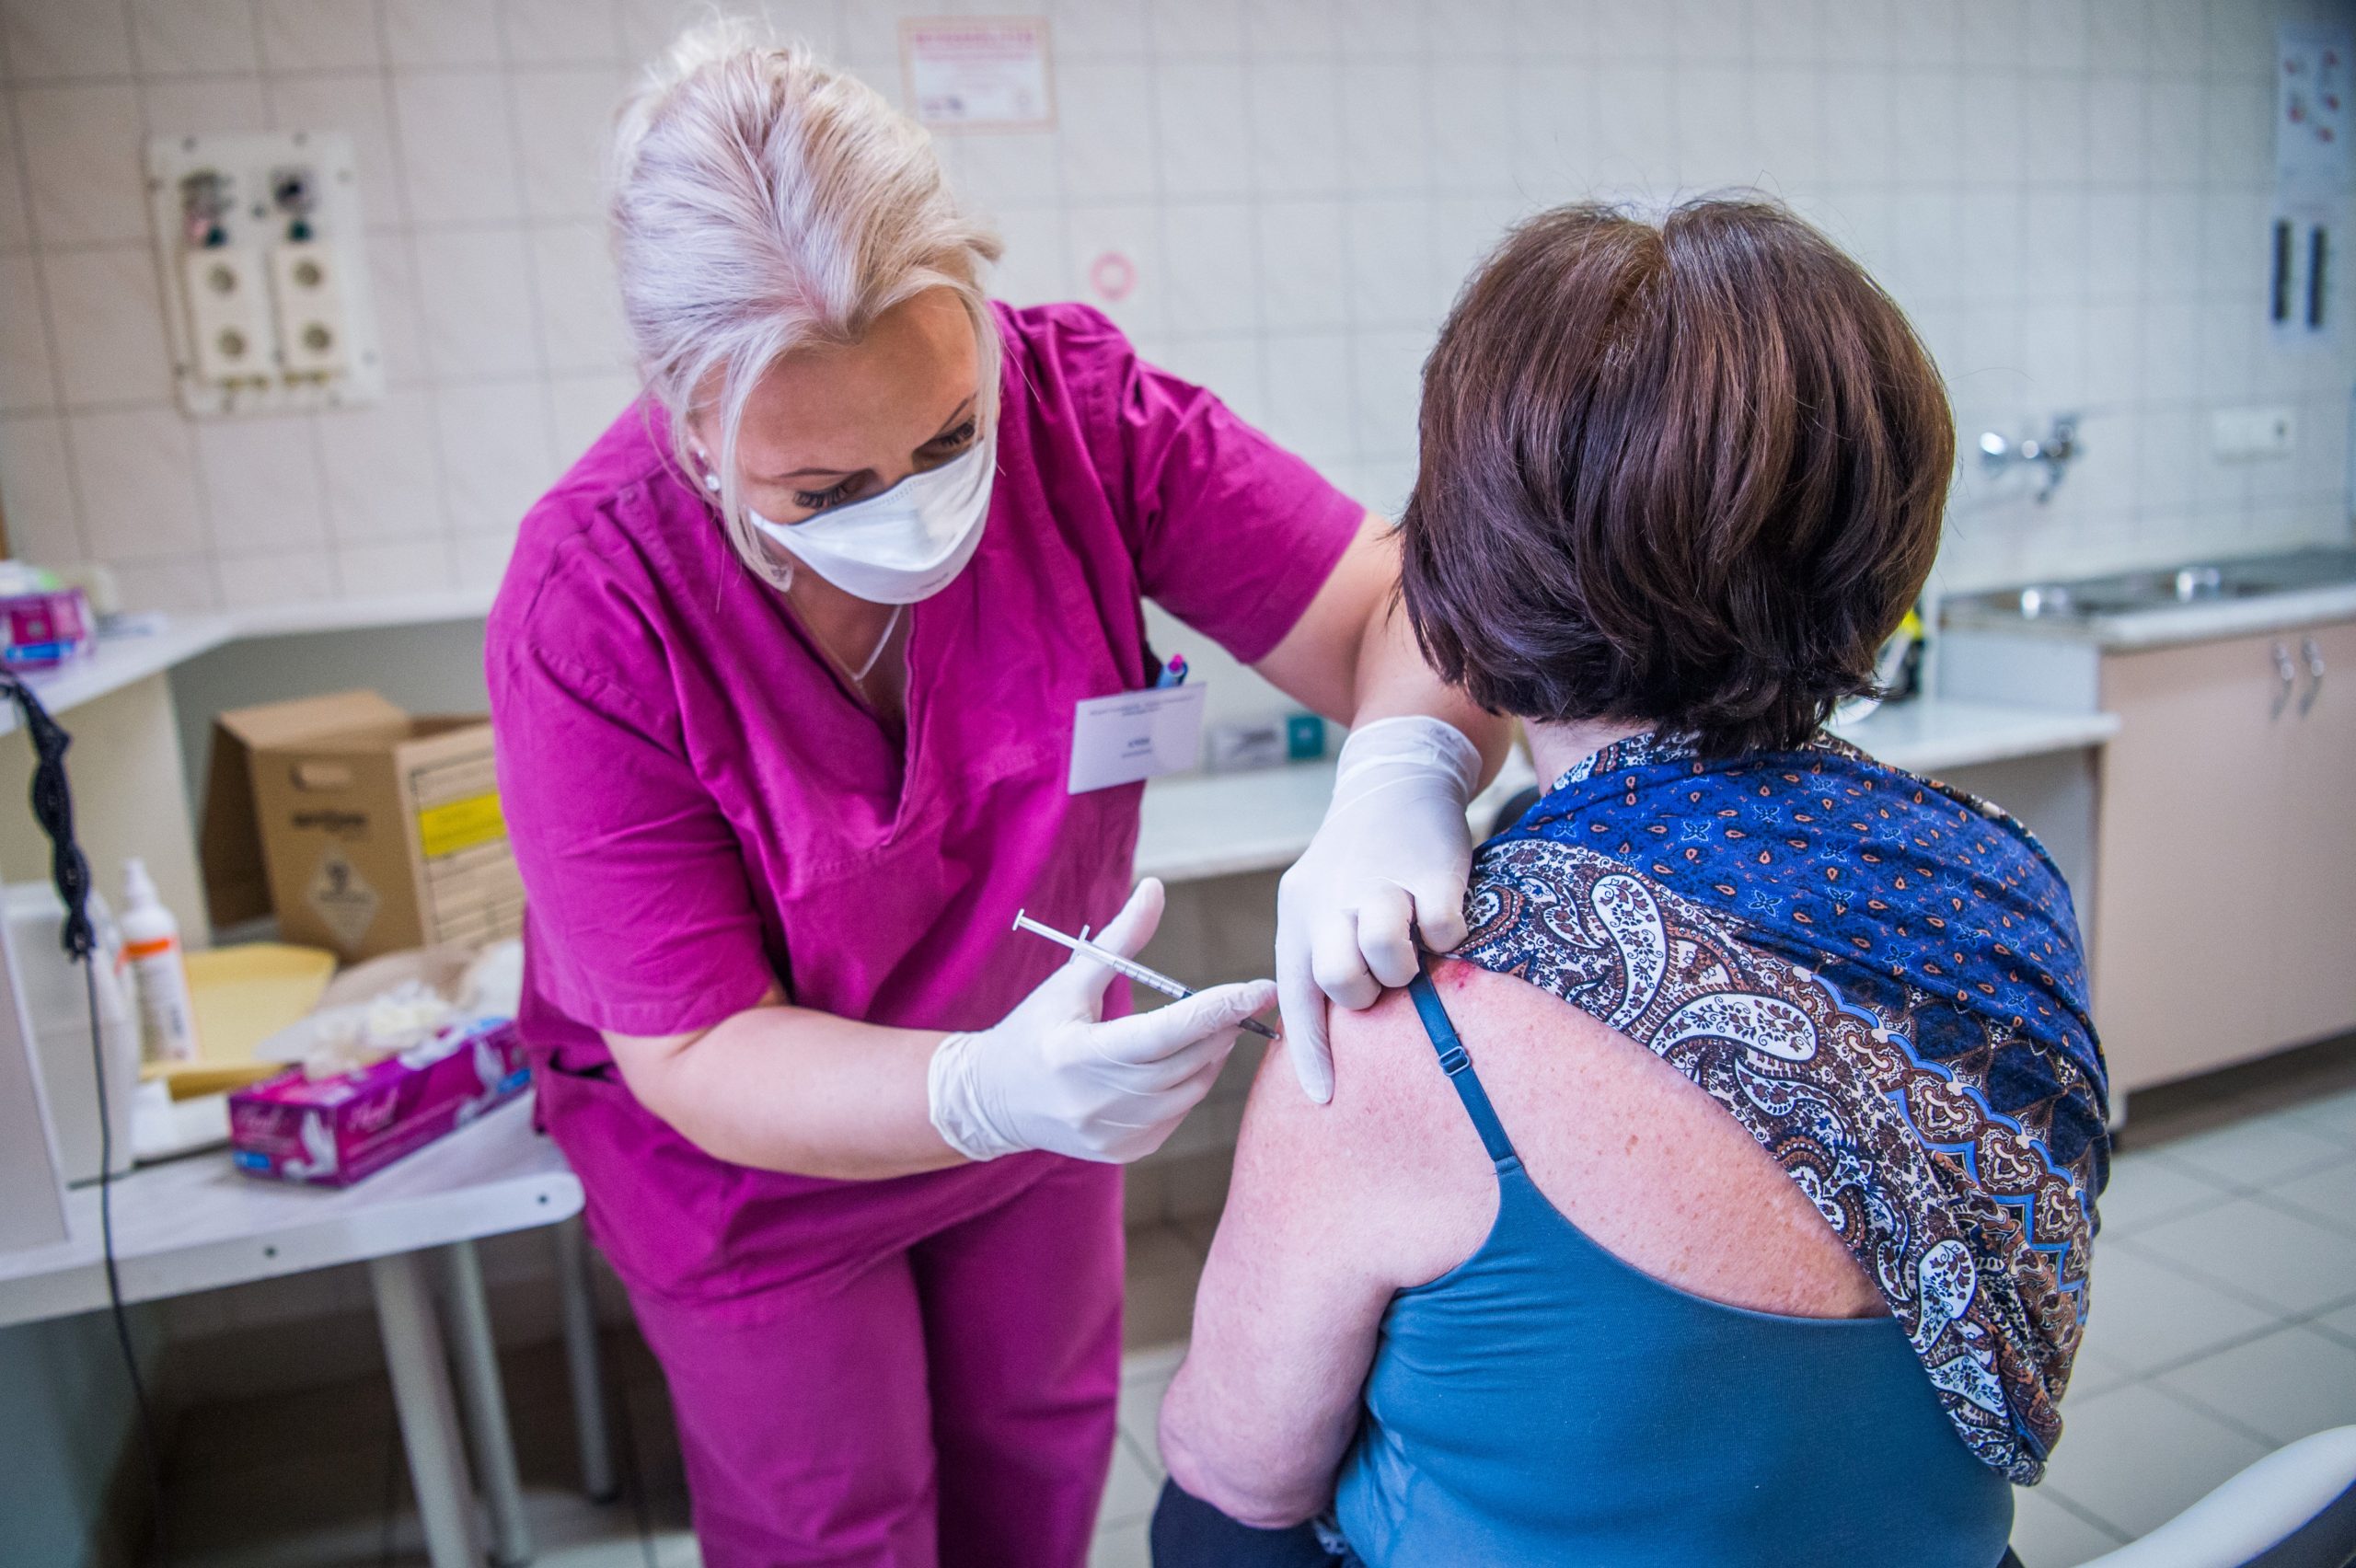 Priority List of Hungary's Vaccination Plan Revealed